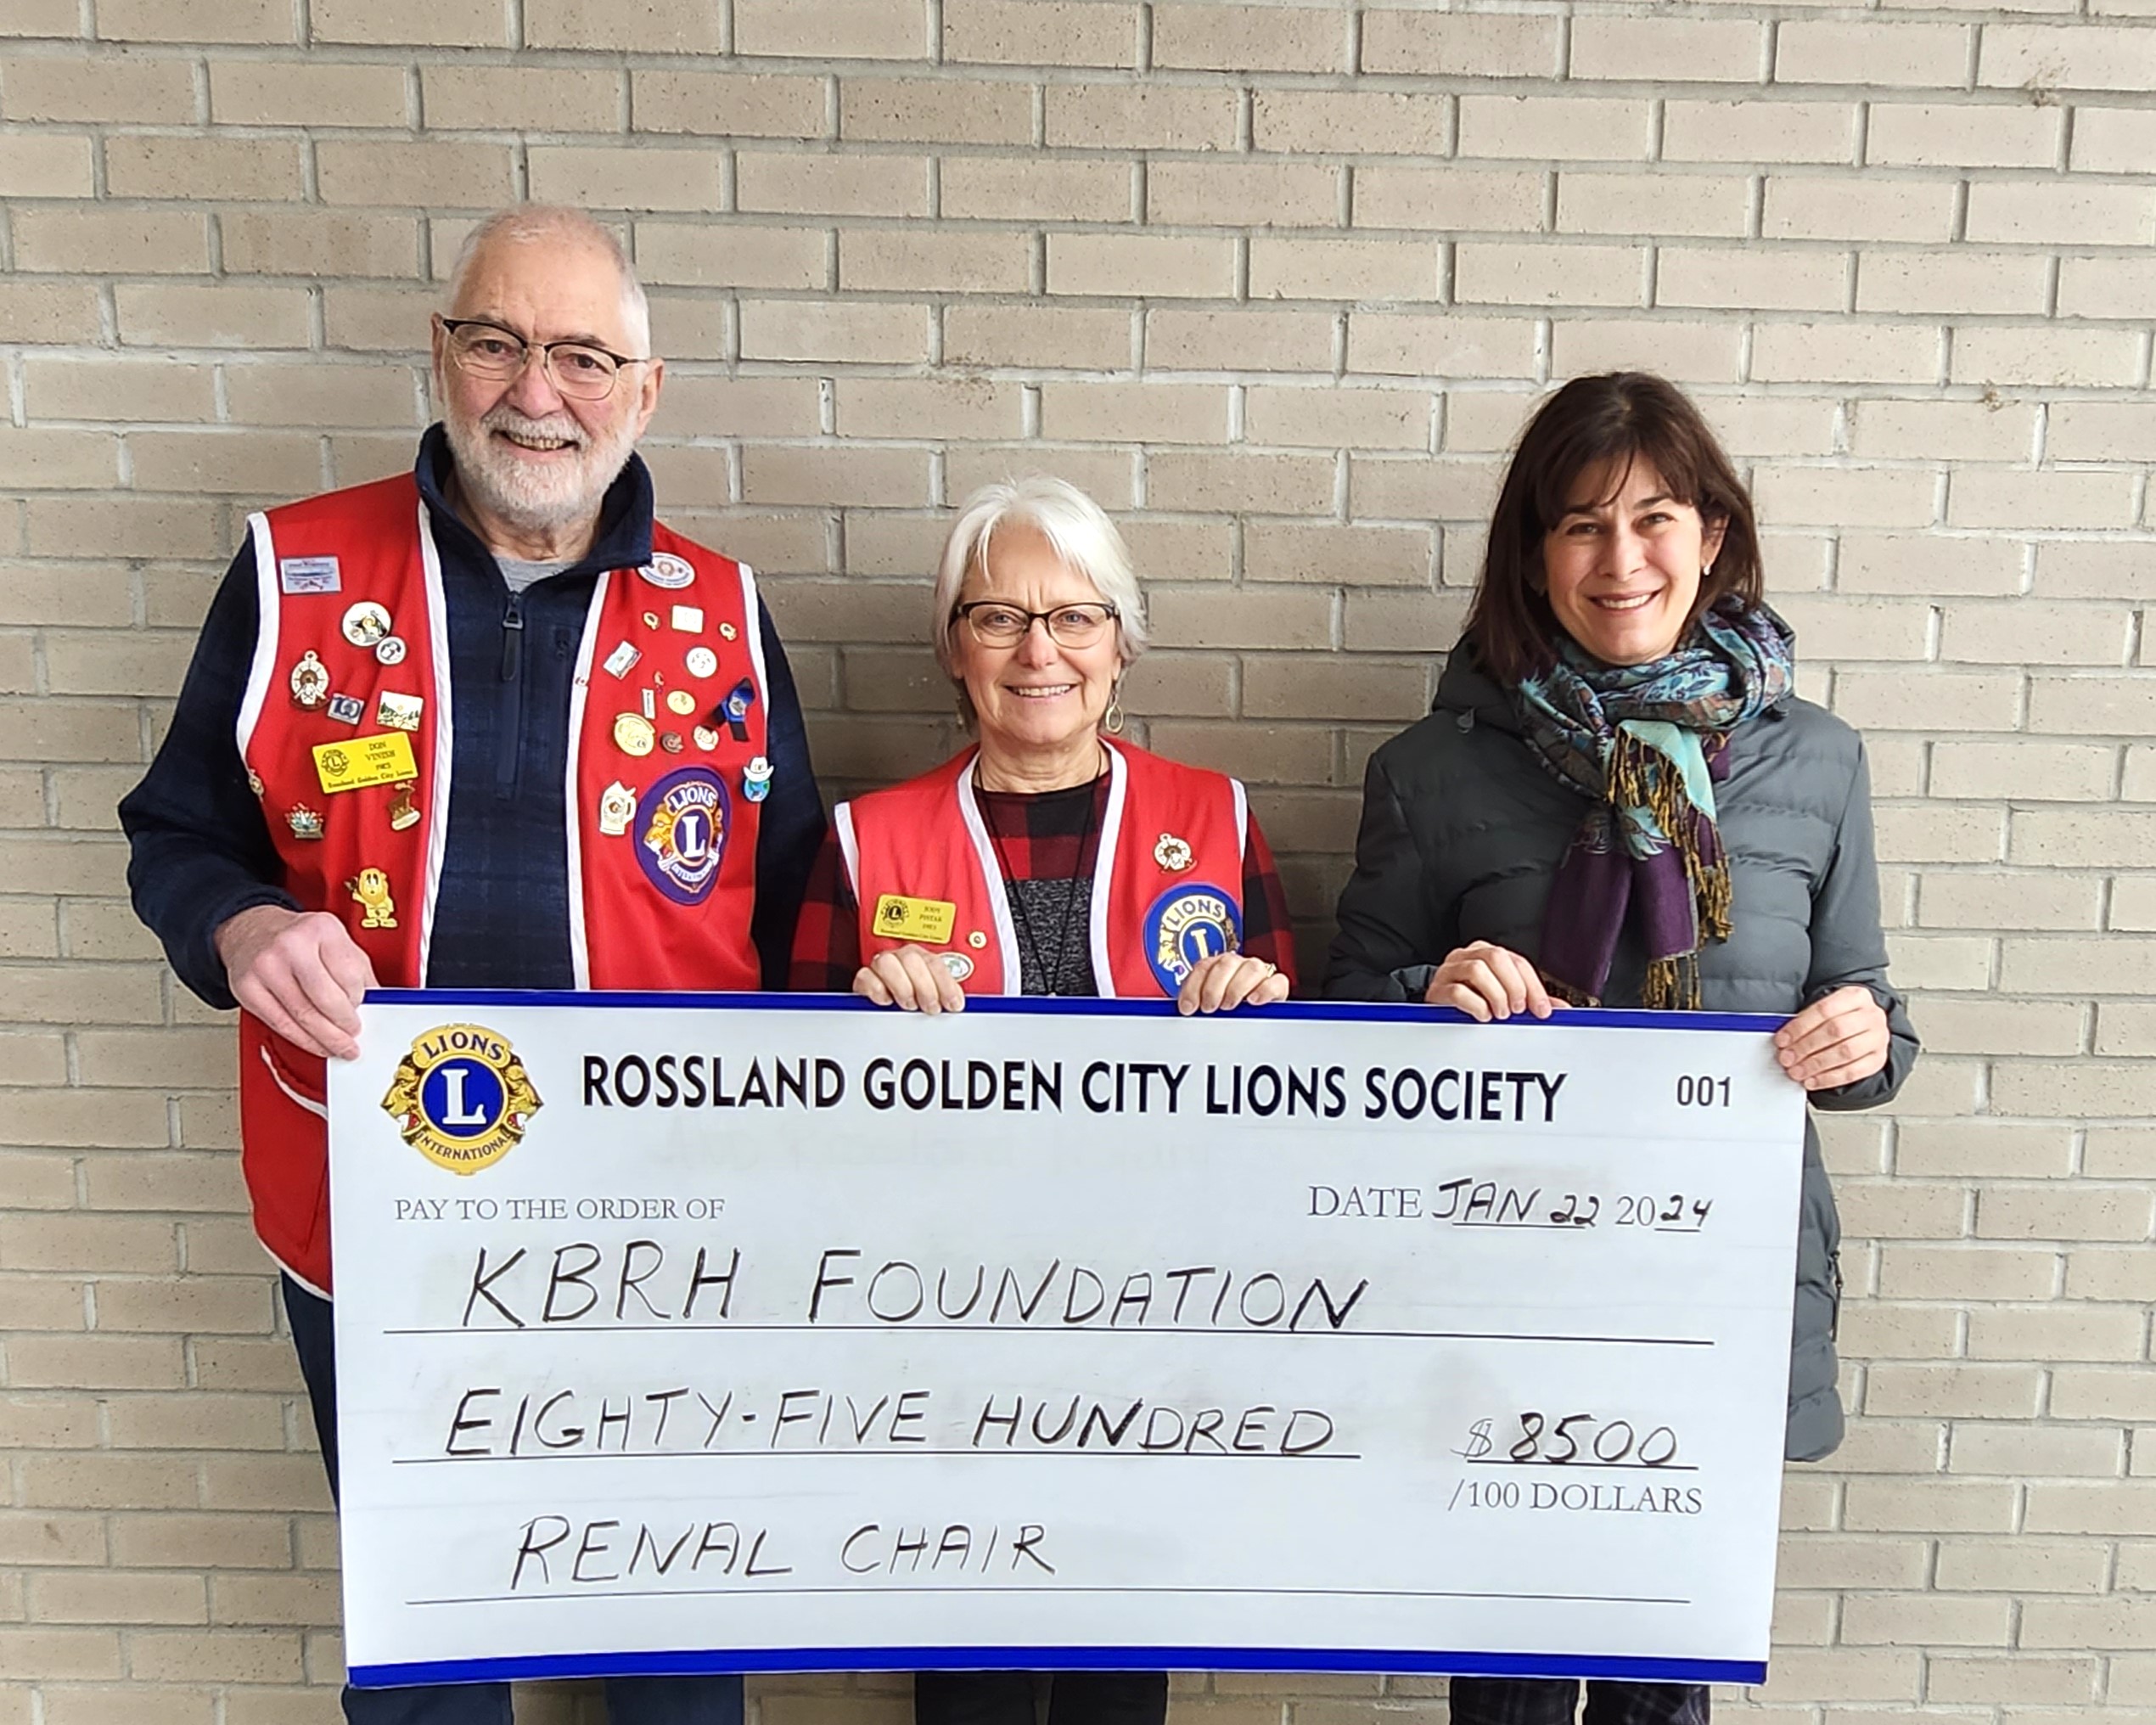 Three people, two of them wearing red vests full of pins, hold a cheque from the Rossland Golden City Lions Society to the KBRH Foundation for $8,500.